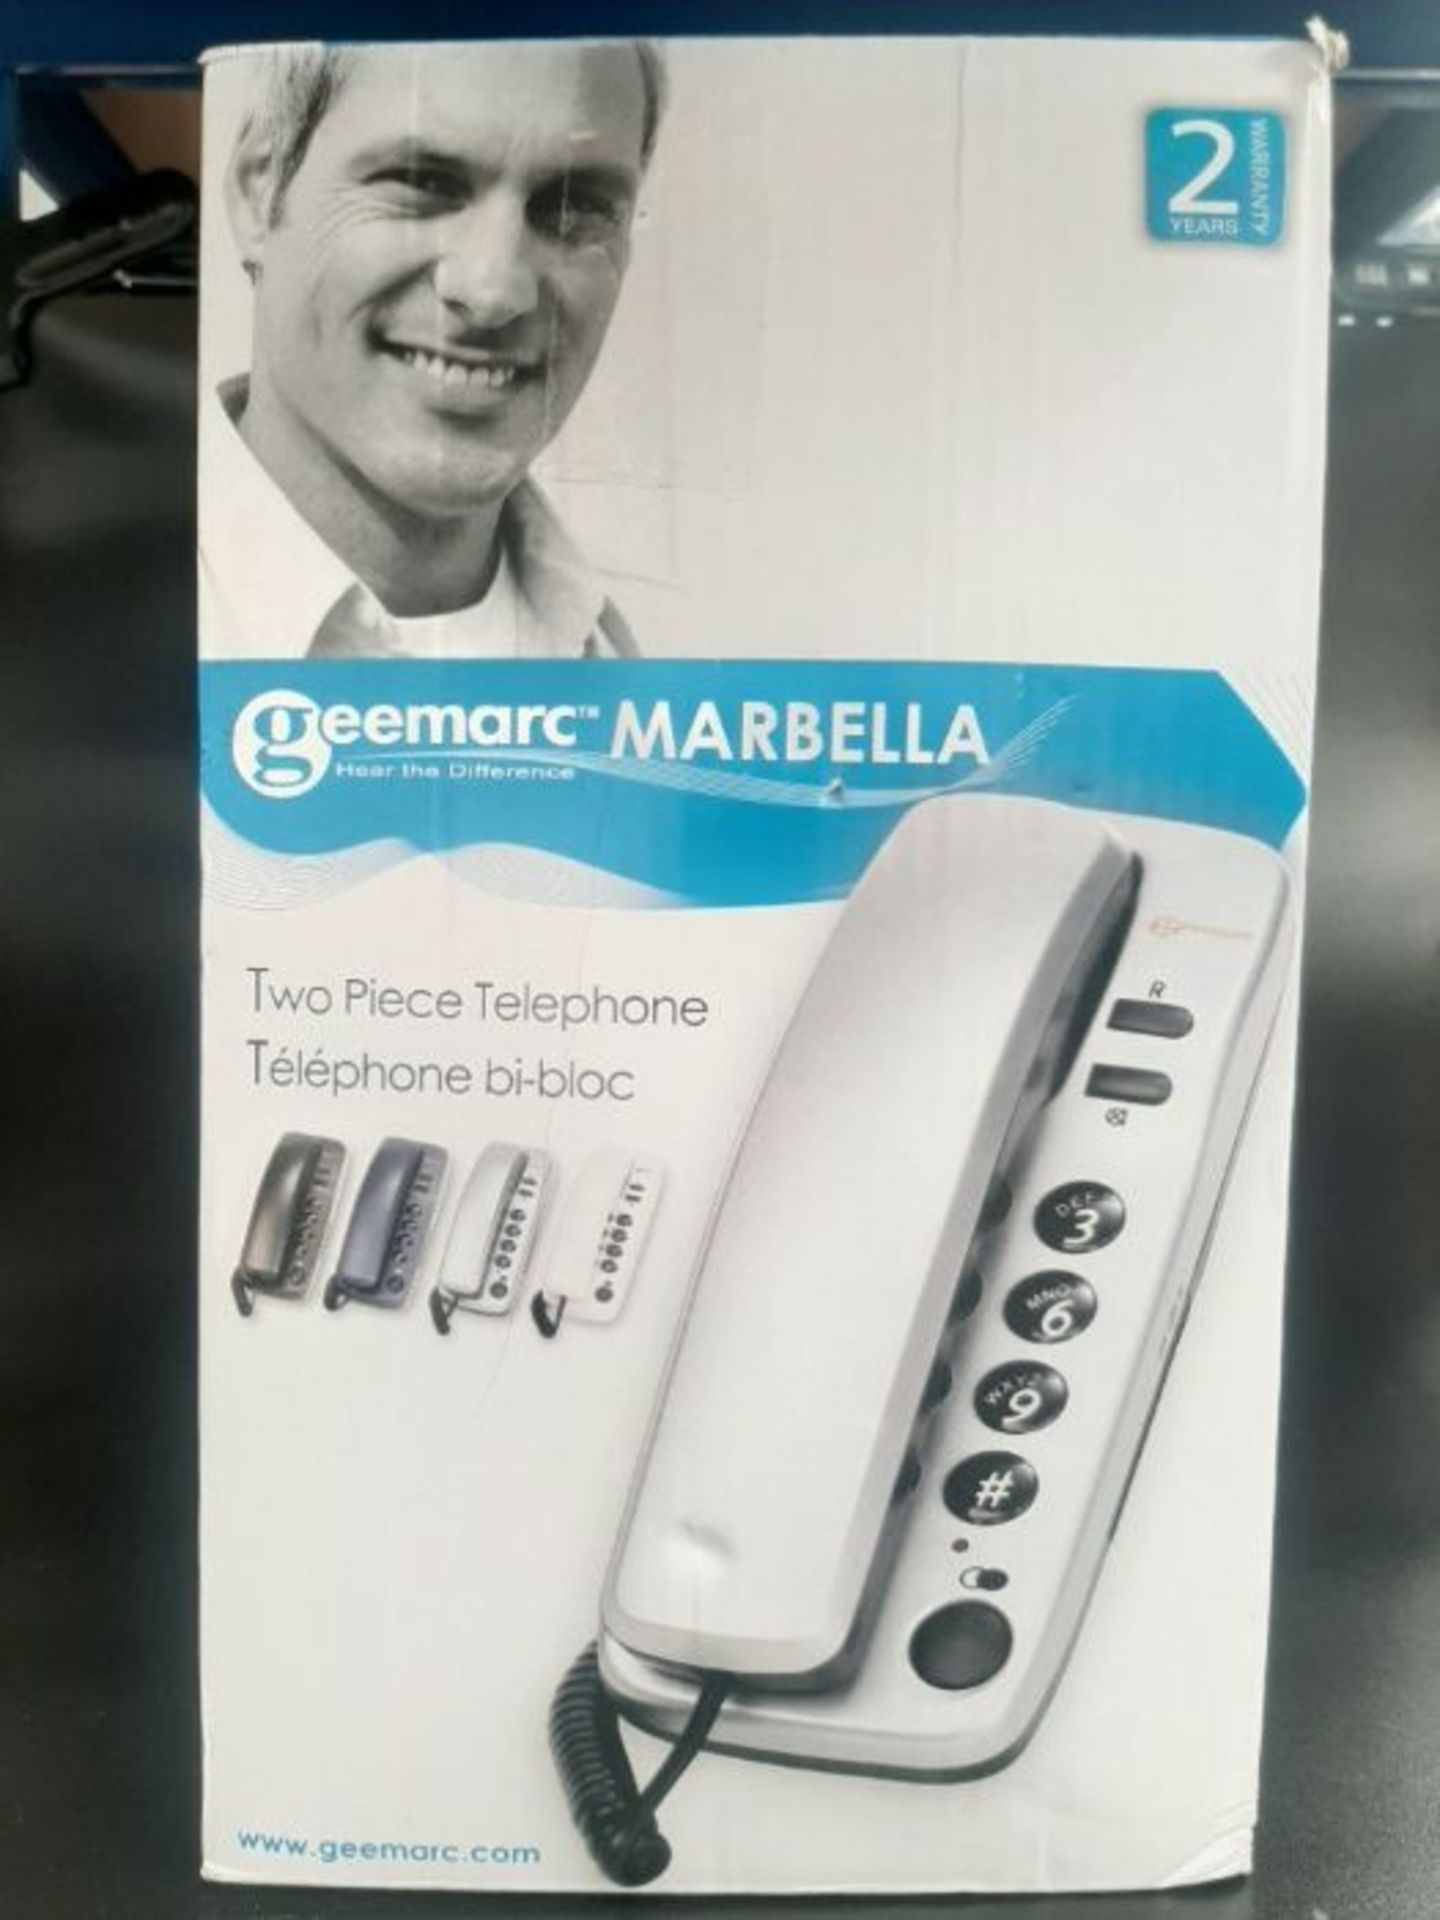 Geemarc Marbella - Gondola Style Corded Analogue Telephone with Large Buttons, Mute Fu - Image 2 of 3